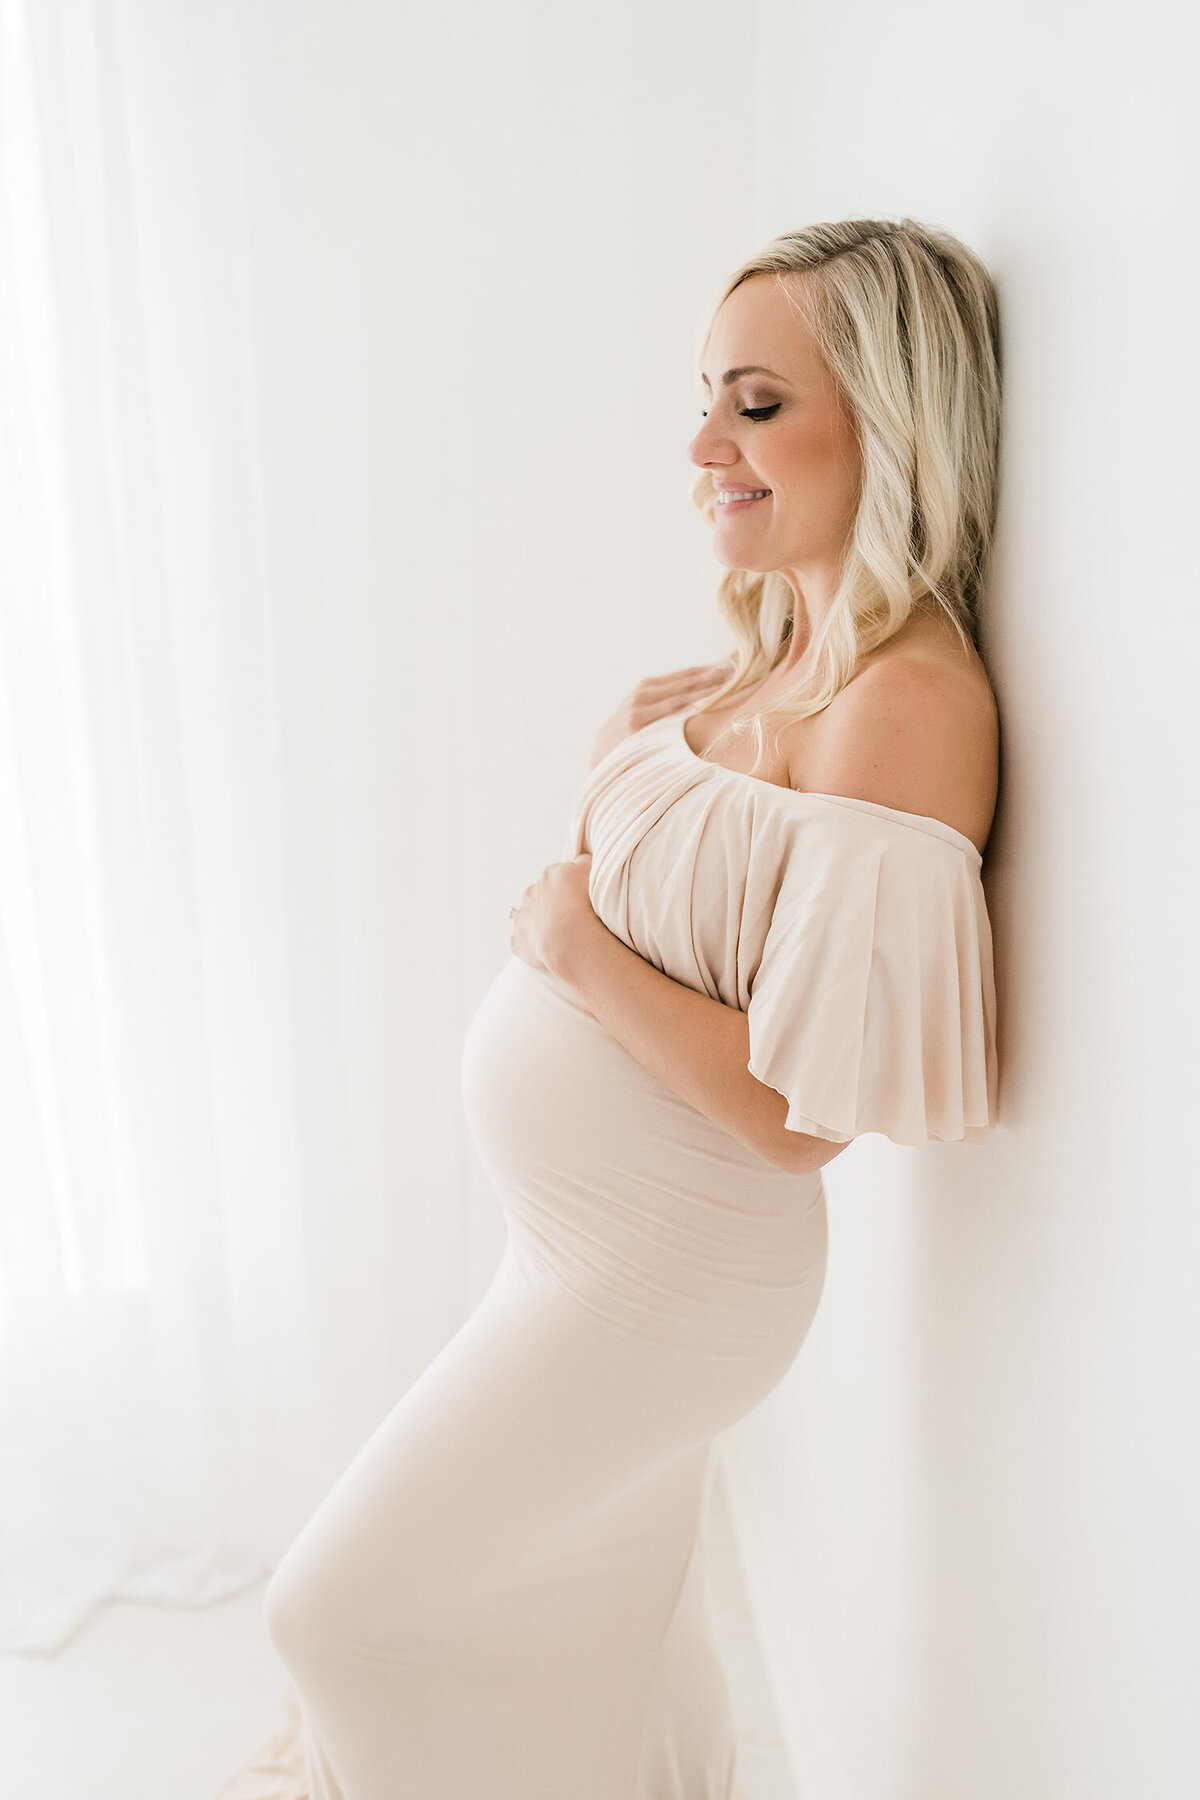 pregnant woman leaning against white wall